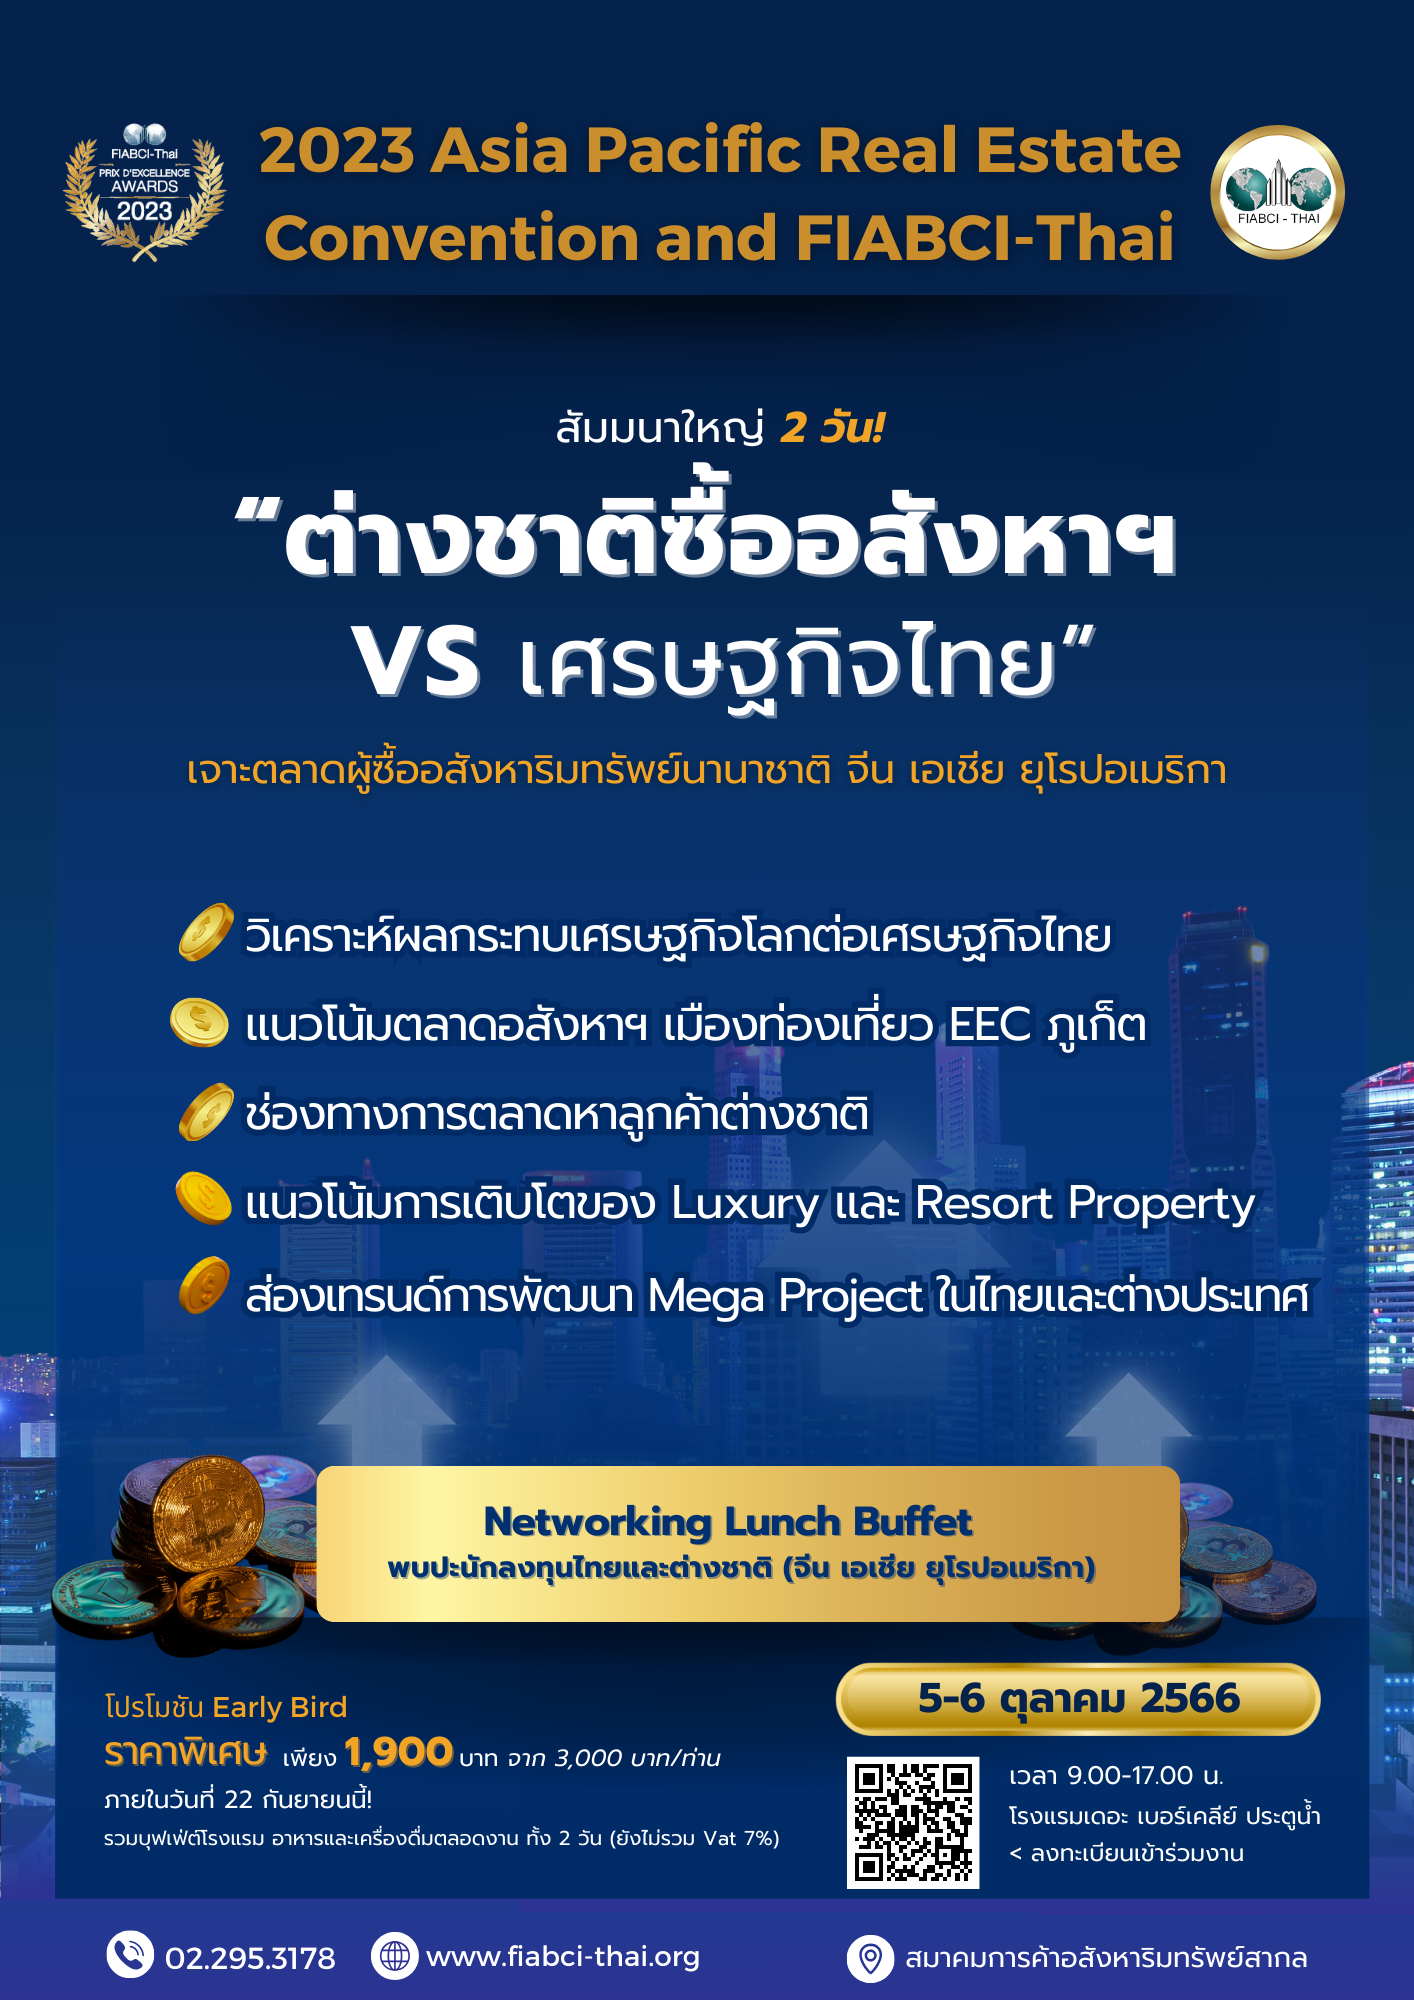 2023 Asia Pacific Real Estate Convention and FIABCI-Thai 